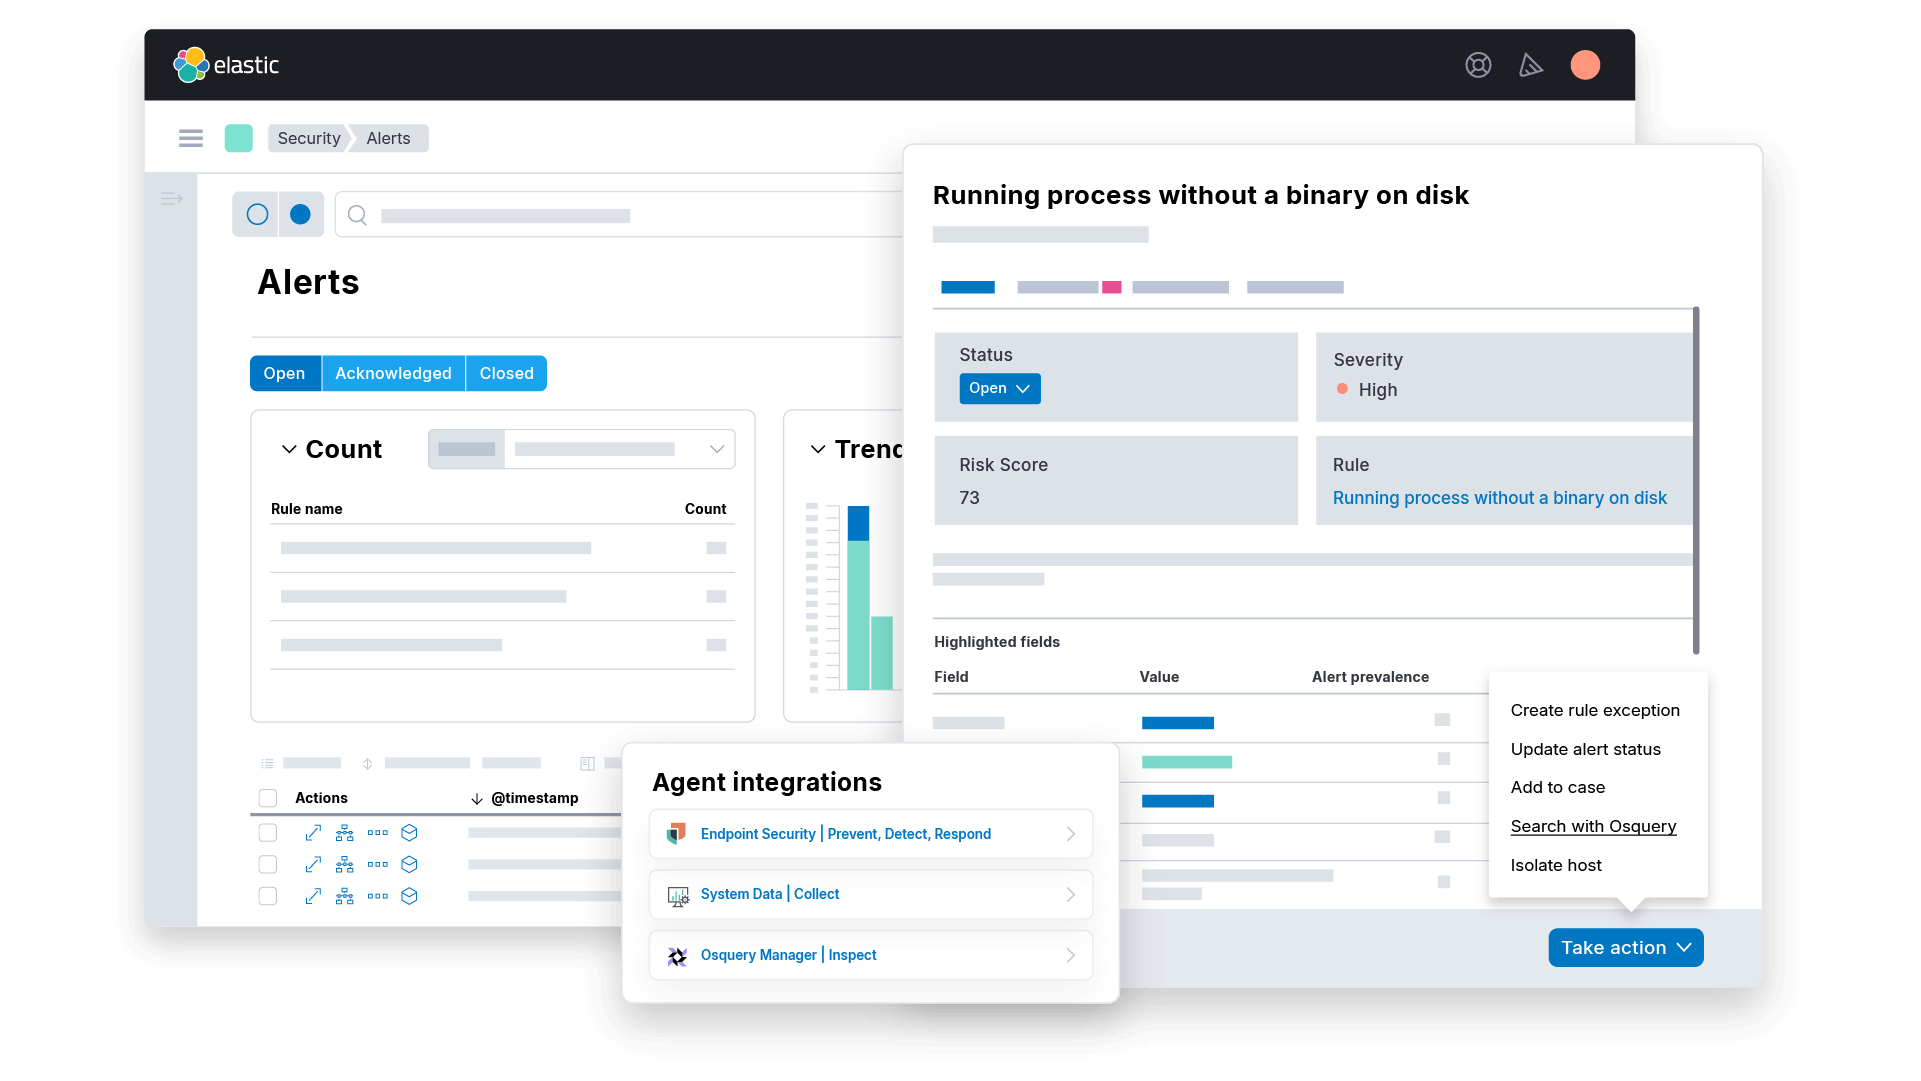 Elastic Security for Endpoint, with alerts overview, alert details, and Agent integrations for endpoint prevention, OS collection, and Osquery inspection